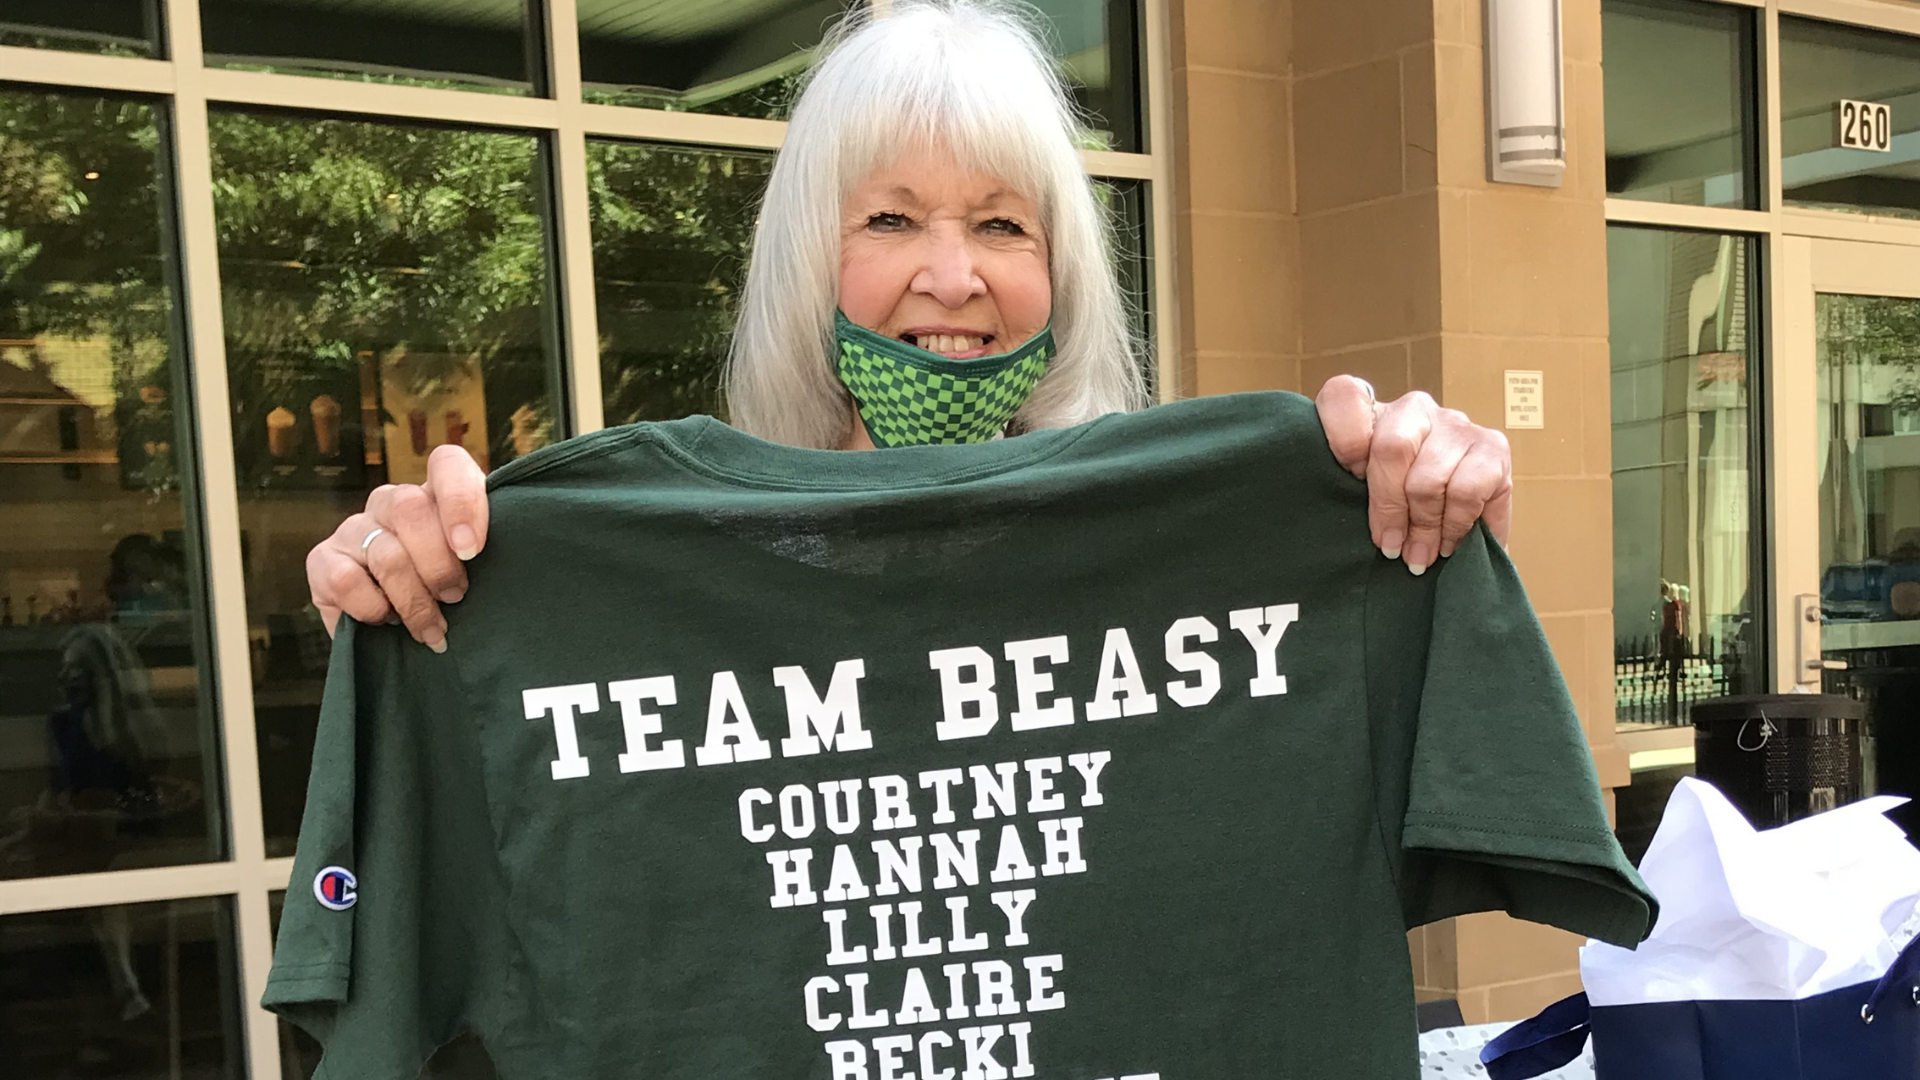 Women's Prison Project client, Beatrice, at Starbucks holding up a "Team Beasy" t-shirt on the day of her release from Louisiana Correctional Institute for Women.